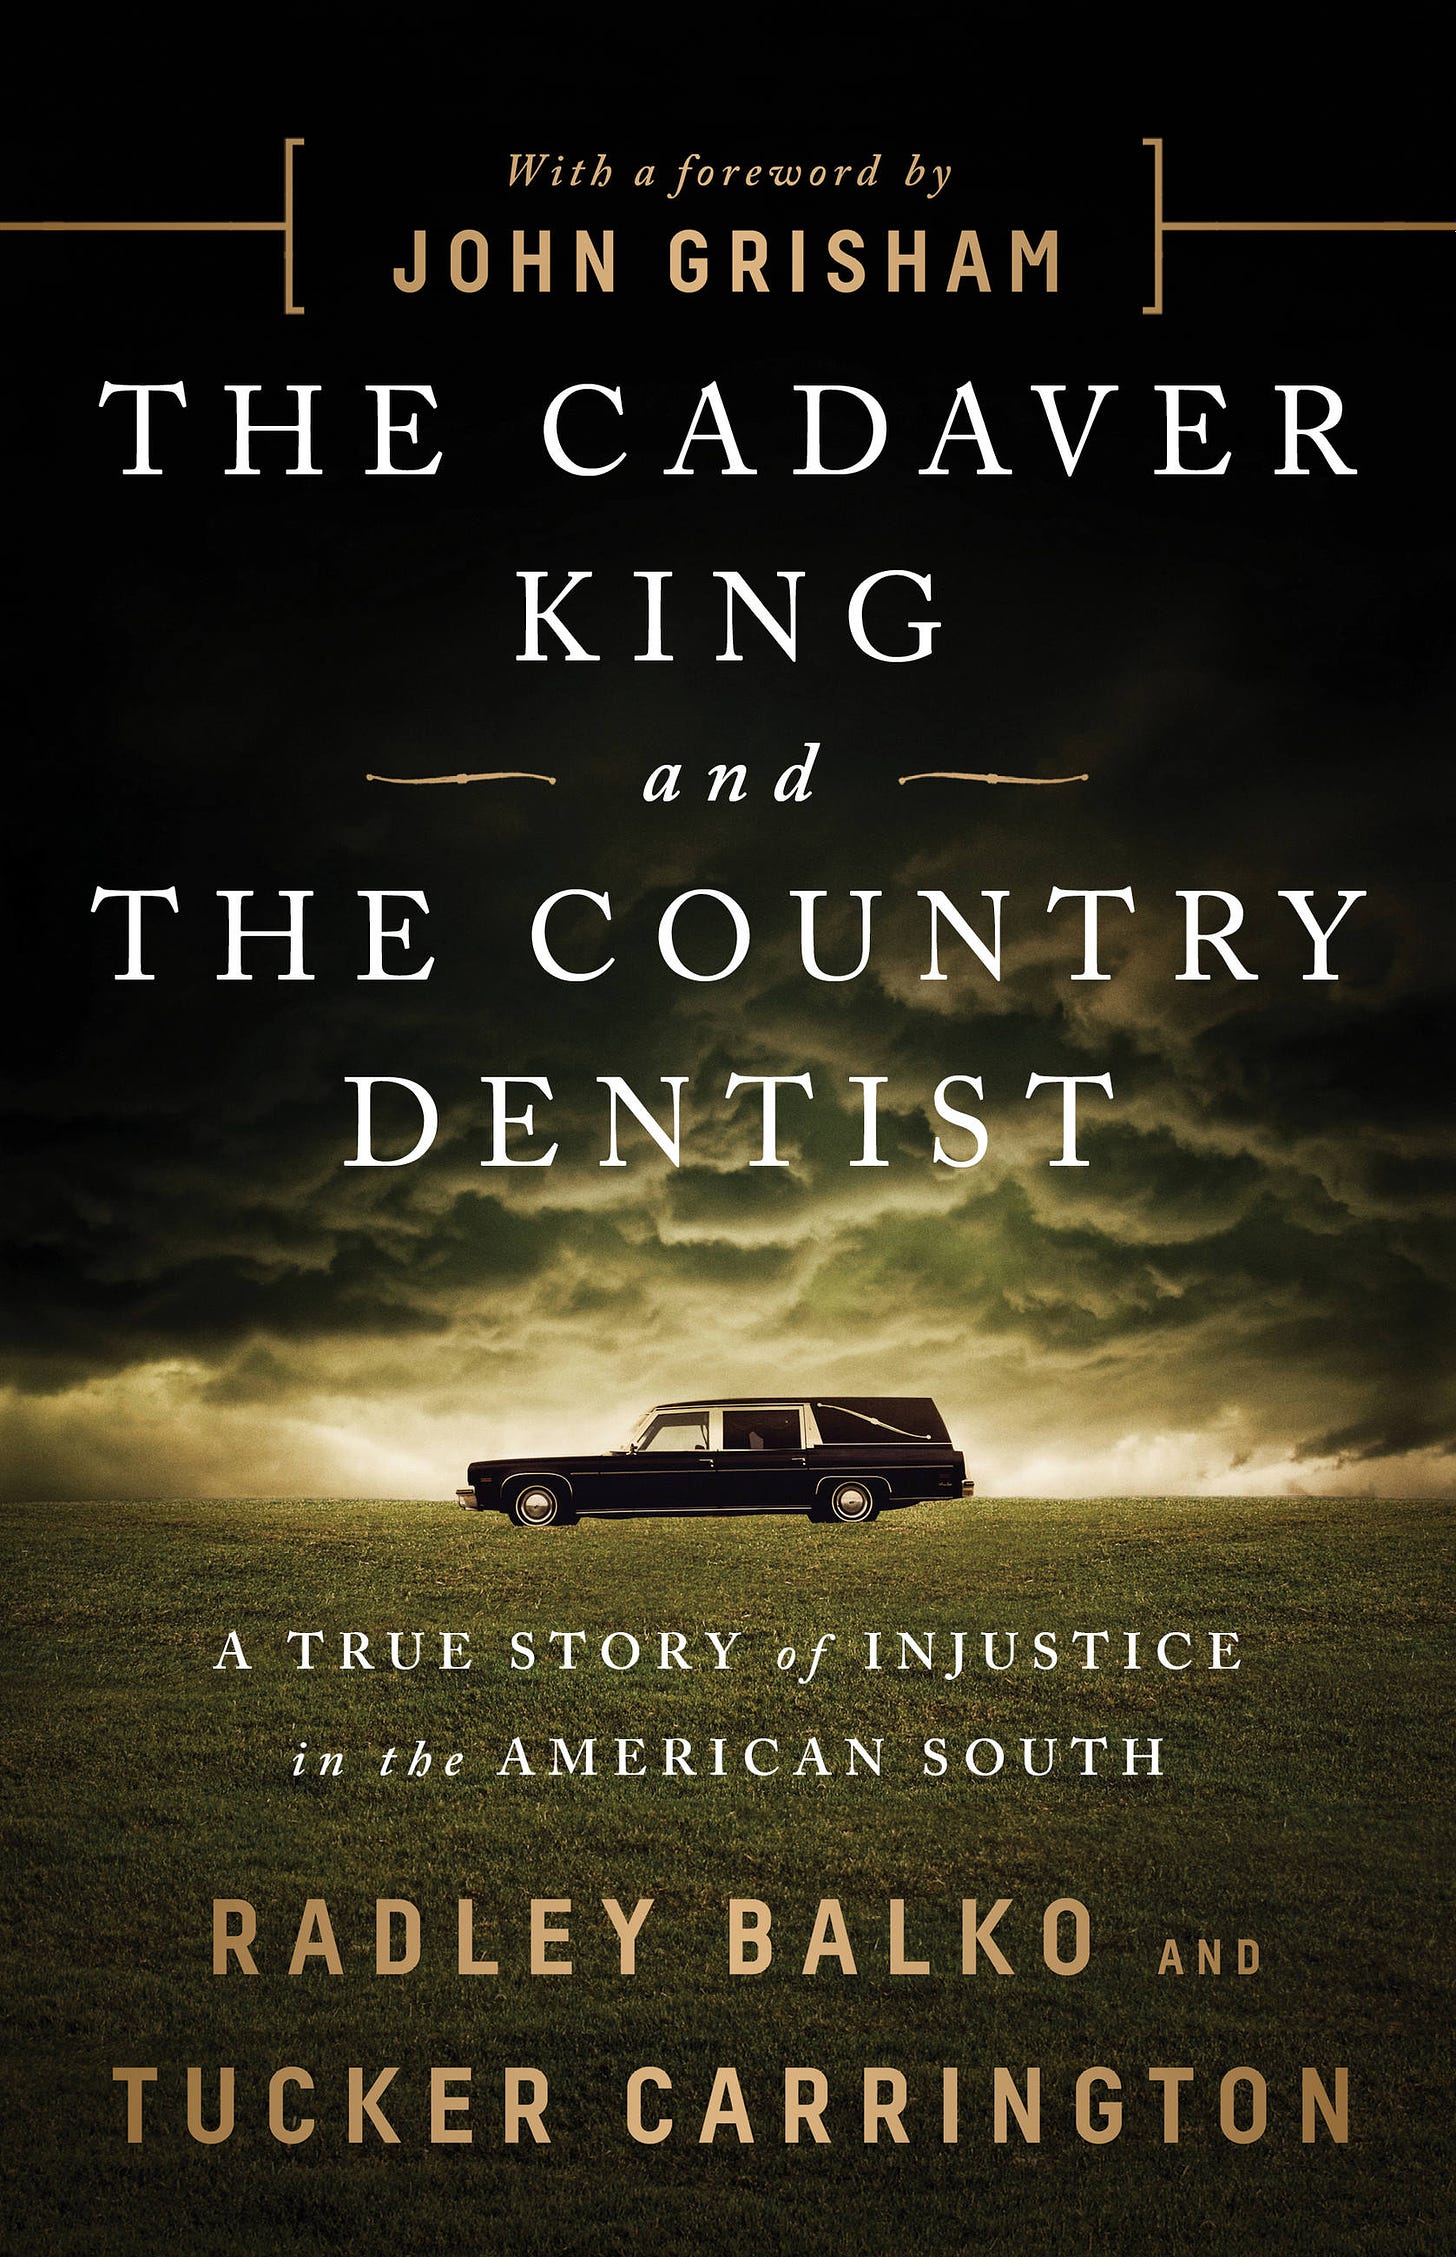 The Cadaver King and the Country Dentist by Radley Balko and Tucker Carrington